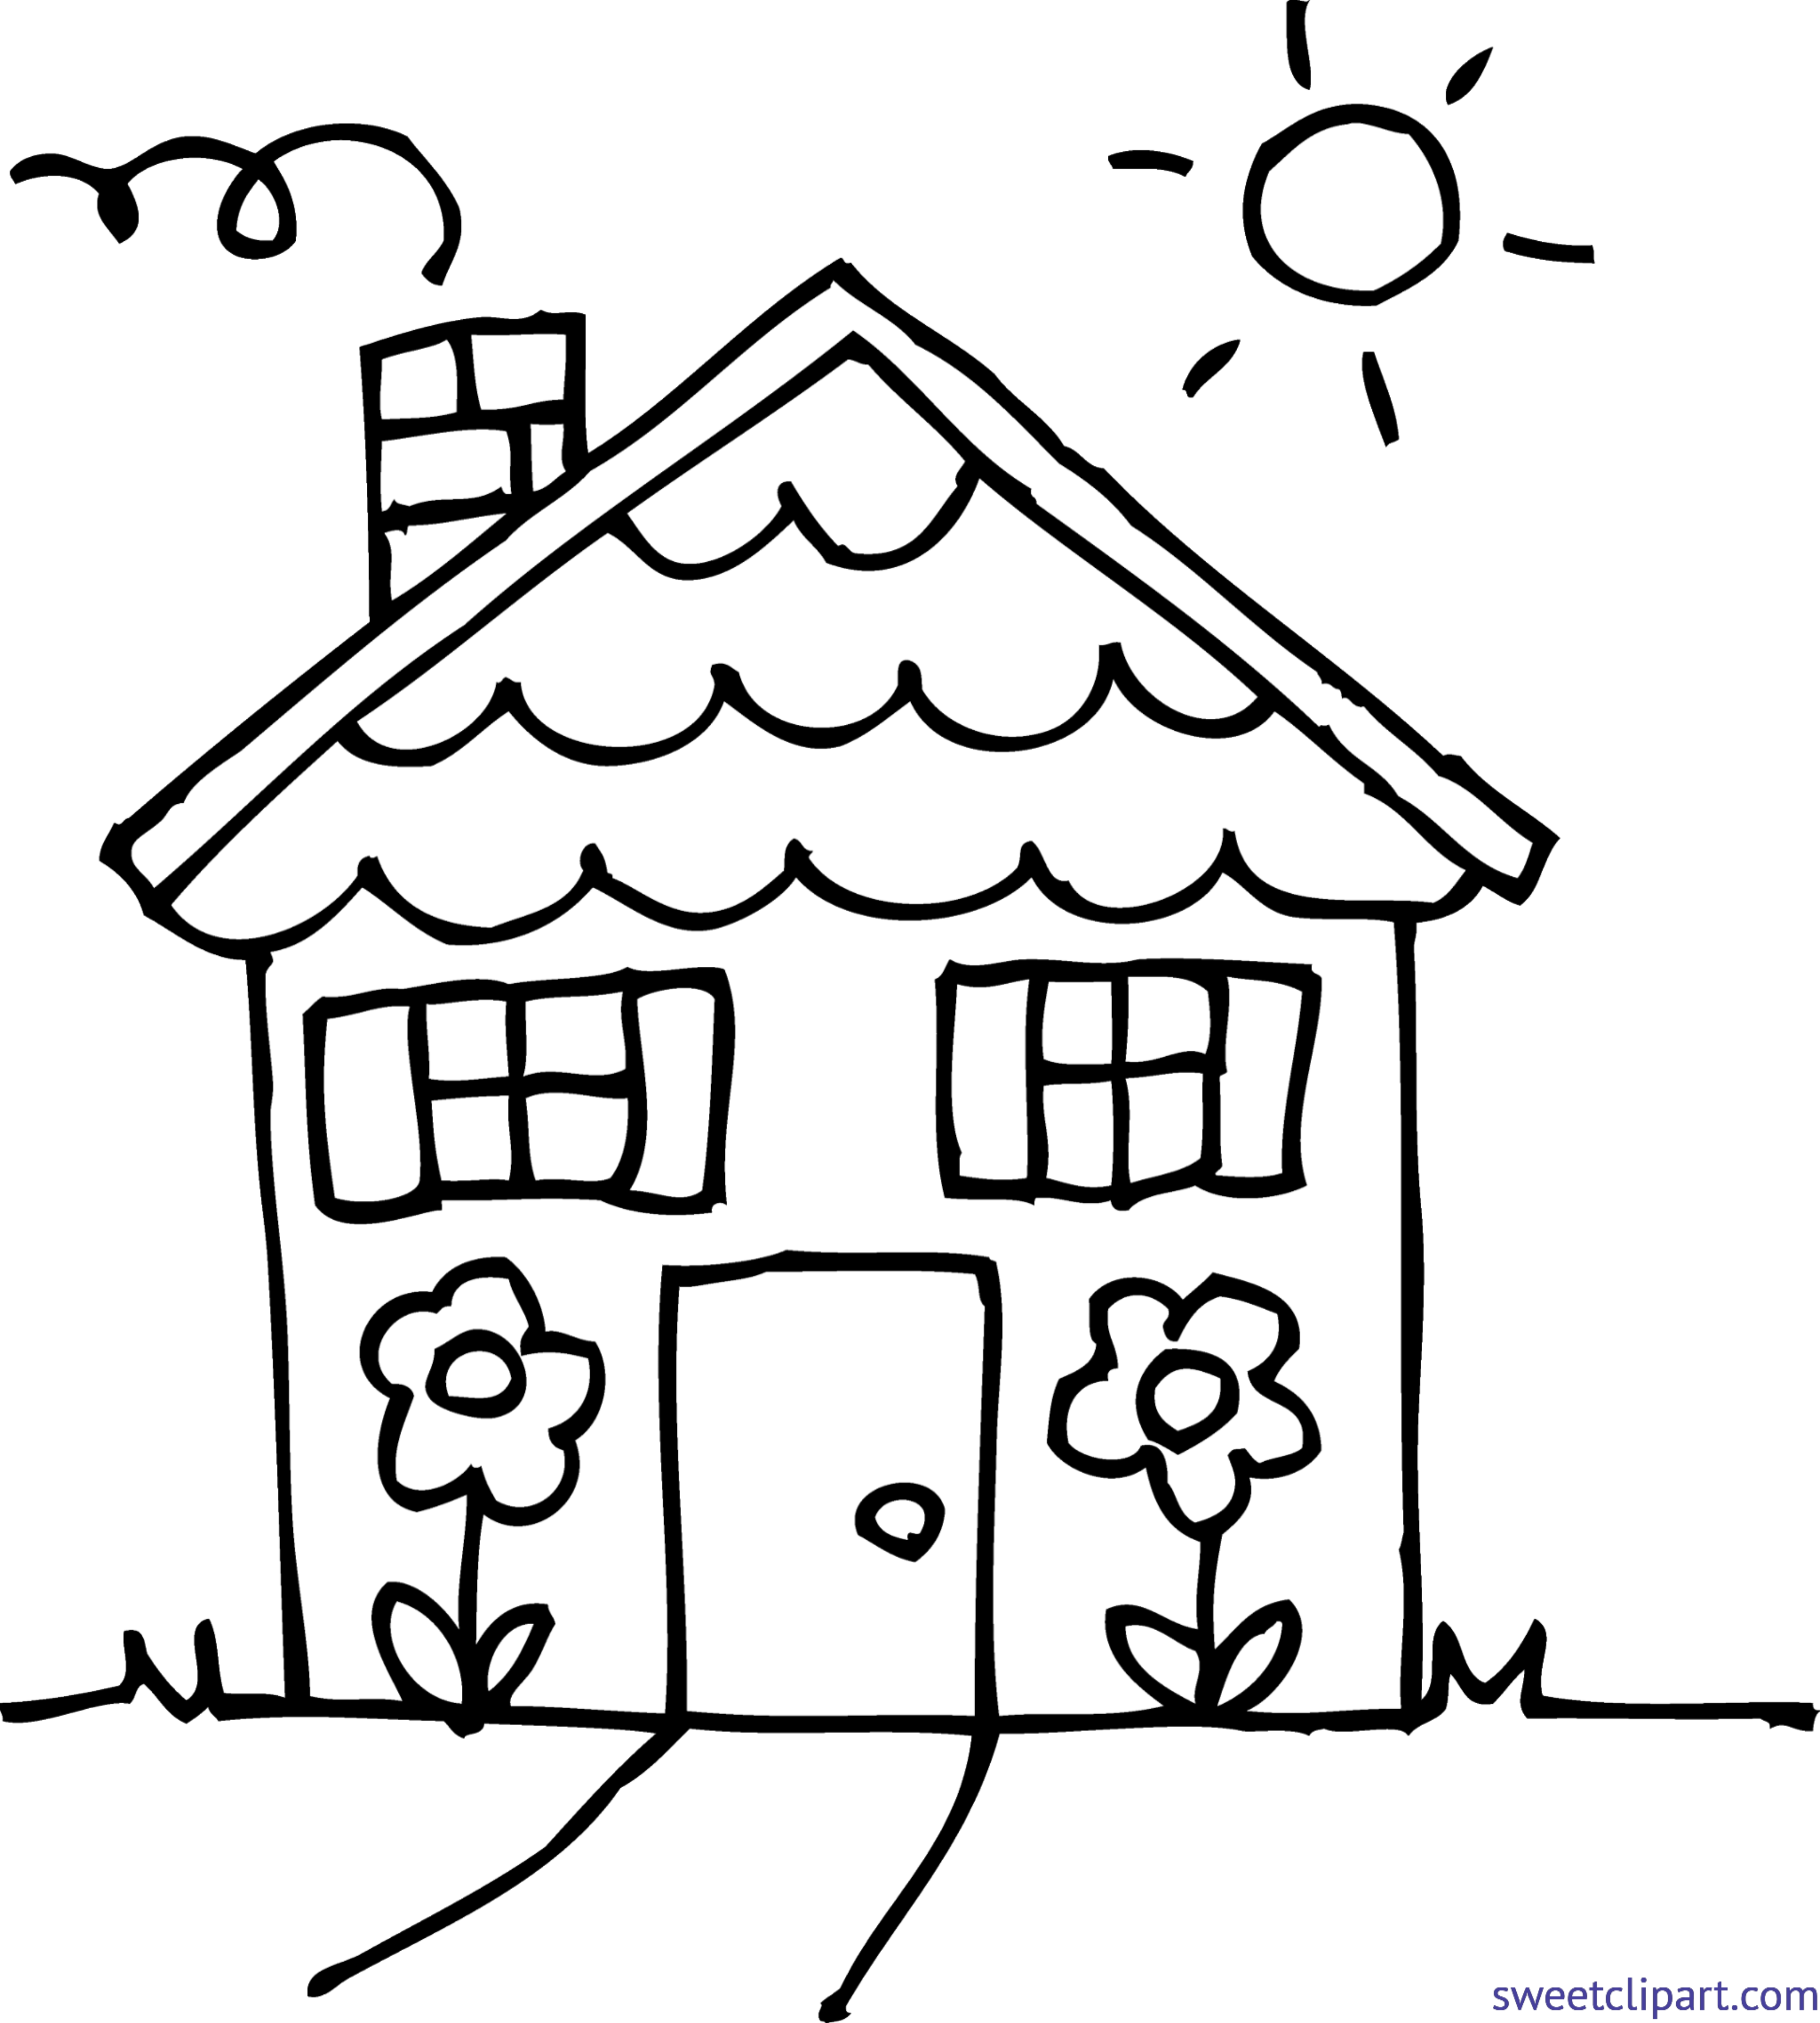 Yogurt clipart coloring page. House line drawing clip